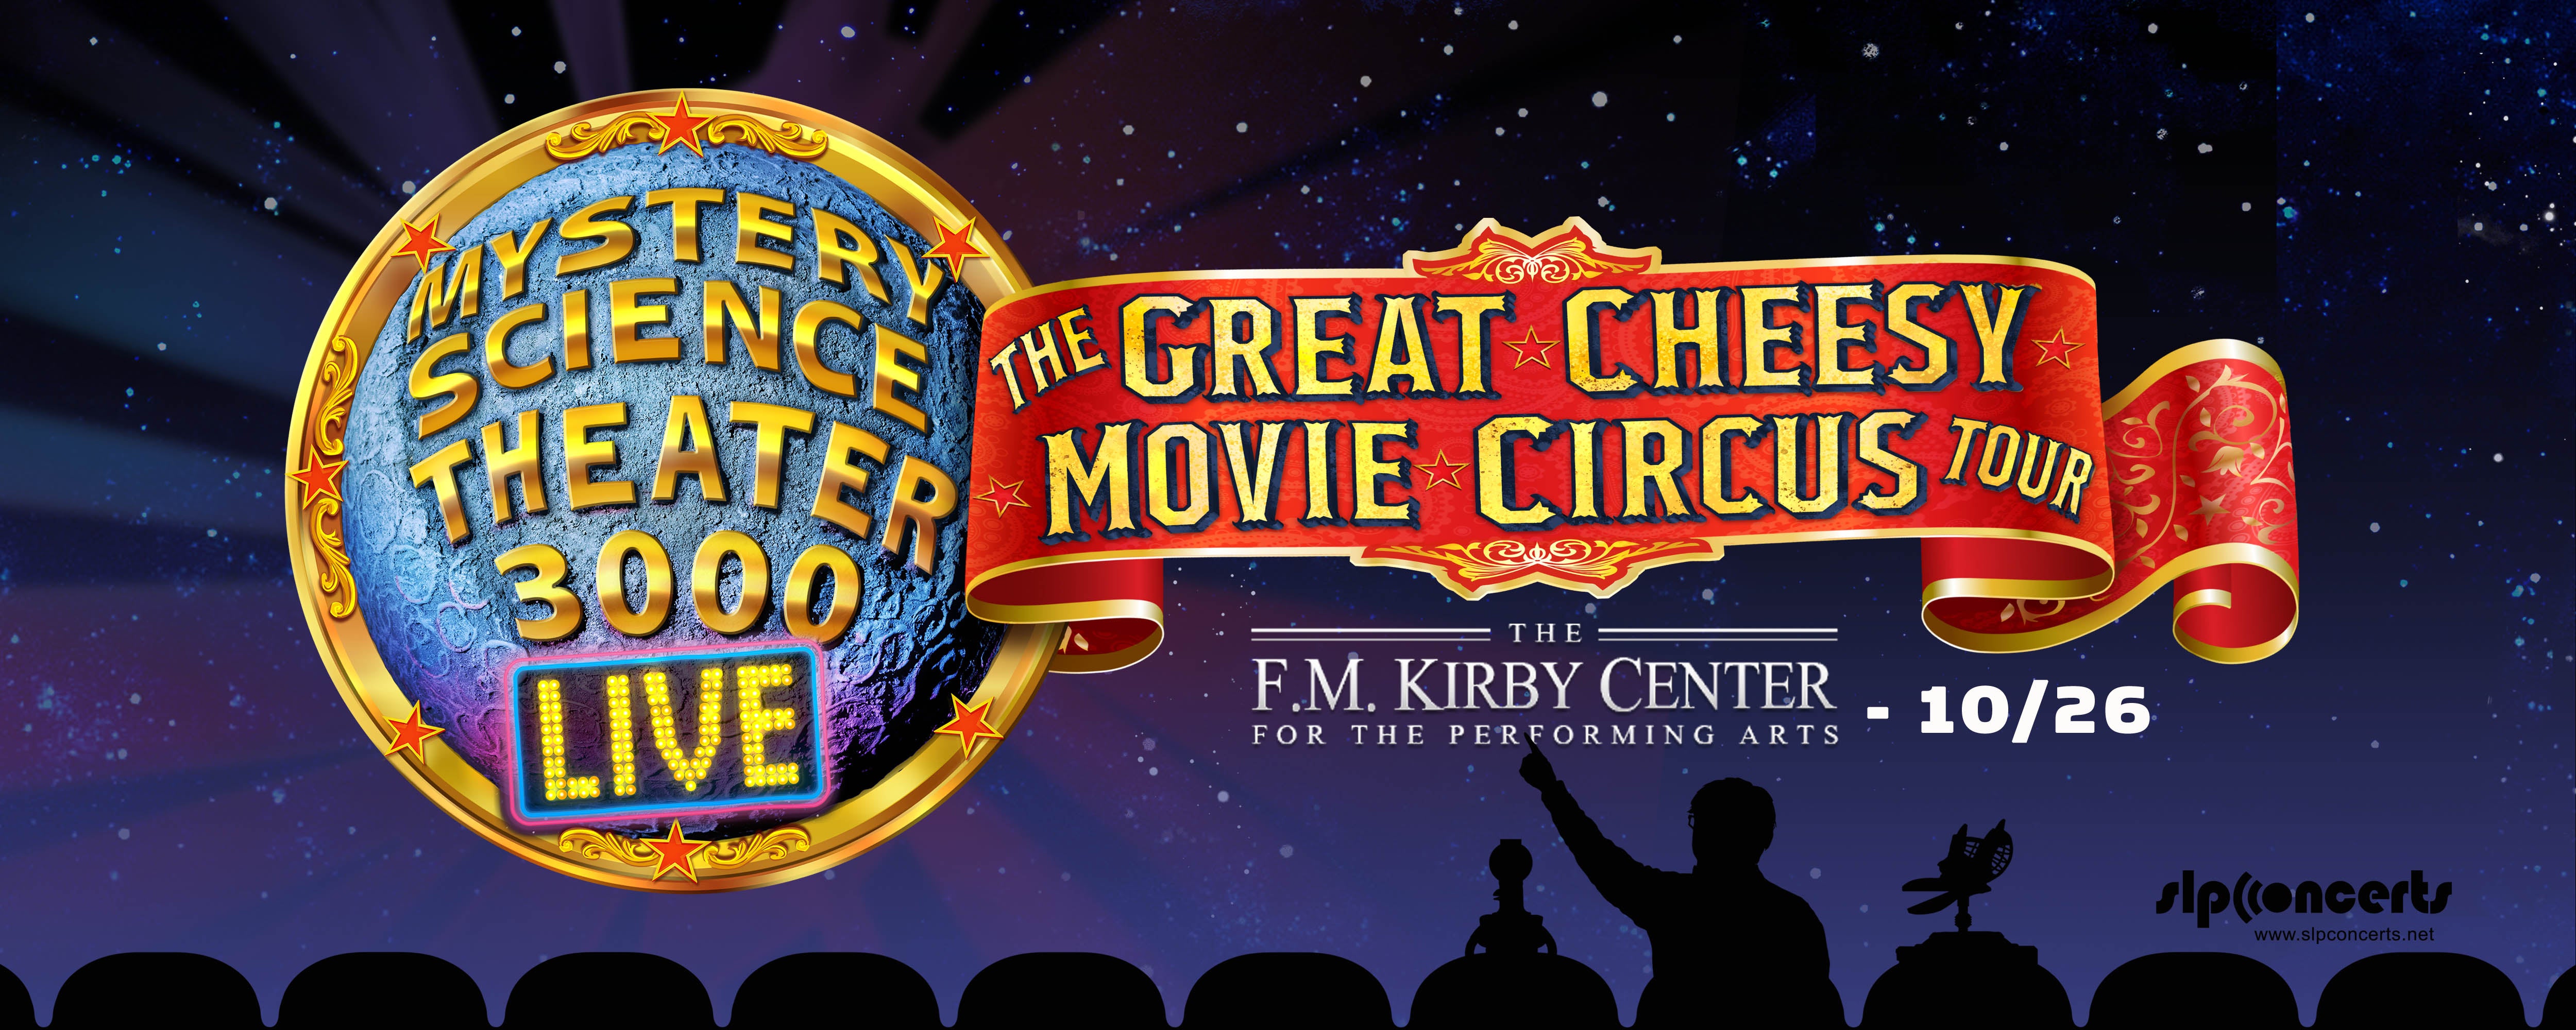 MYSTERY SCIENCE THEATER 3000 LIVE! : The Great Cheesy Movie Circus Tour 